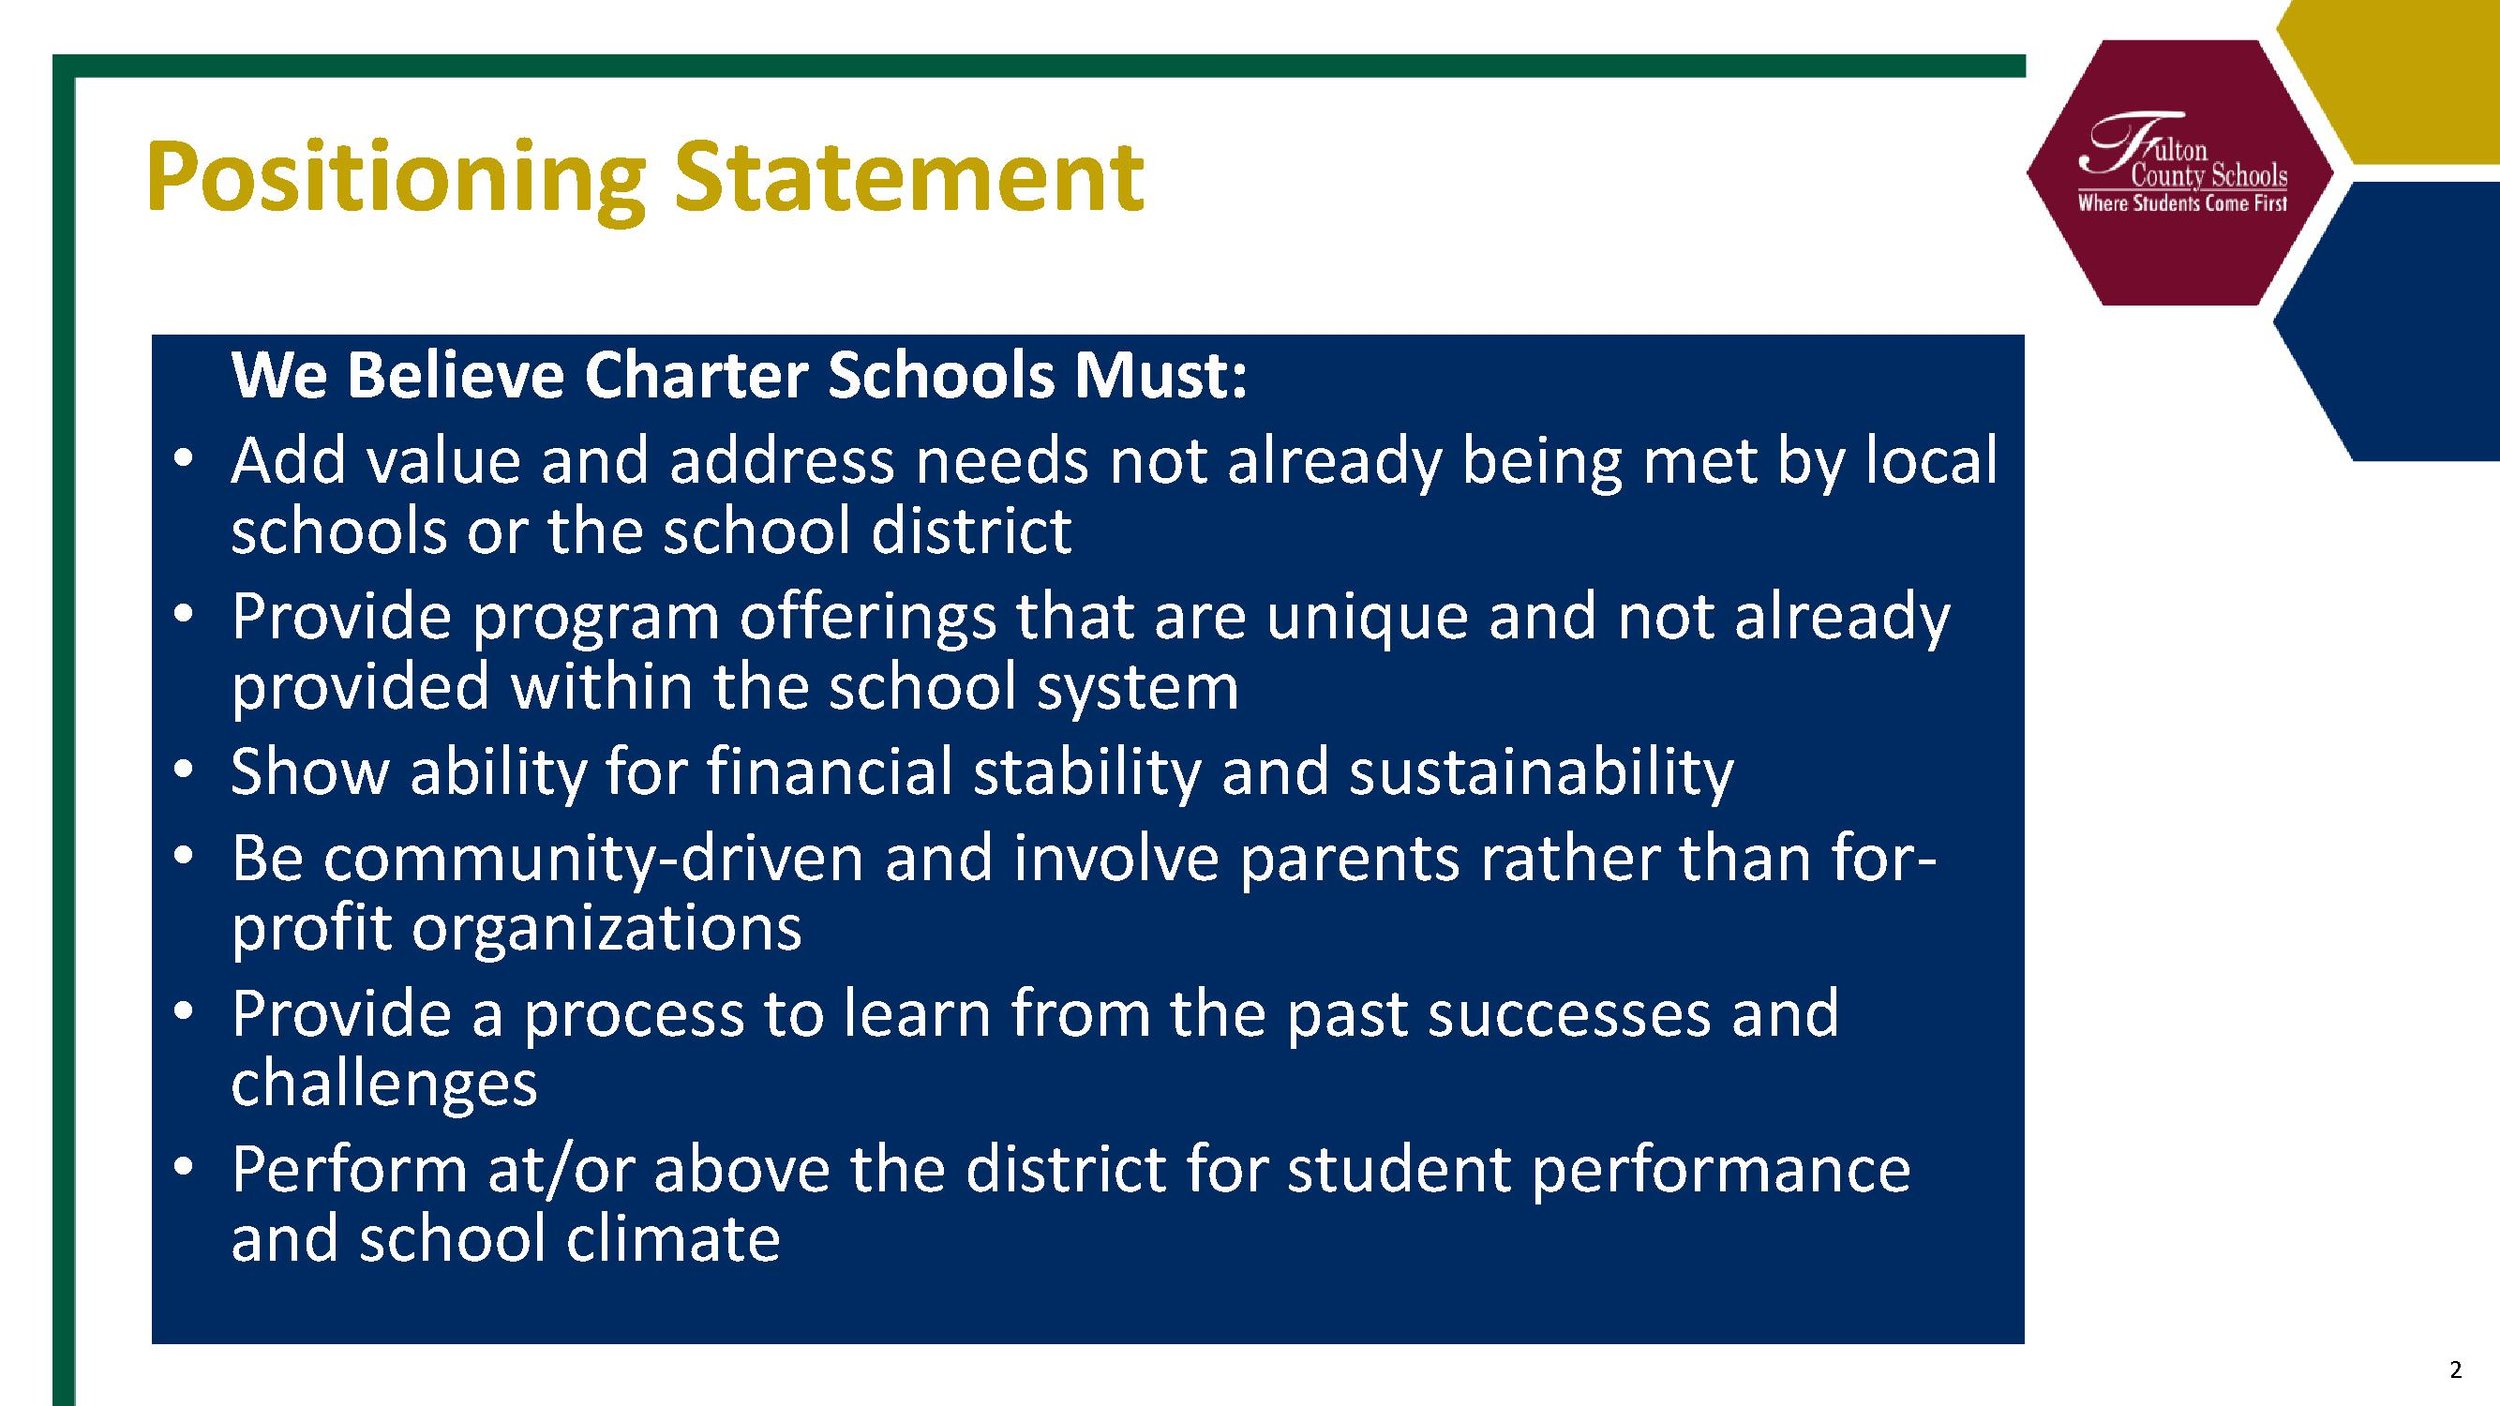 tinywow_state of the charter schools_44782583_2.jpg